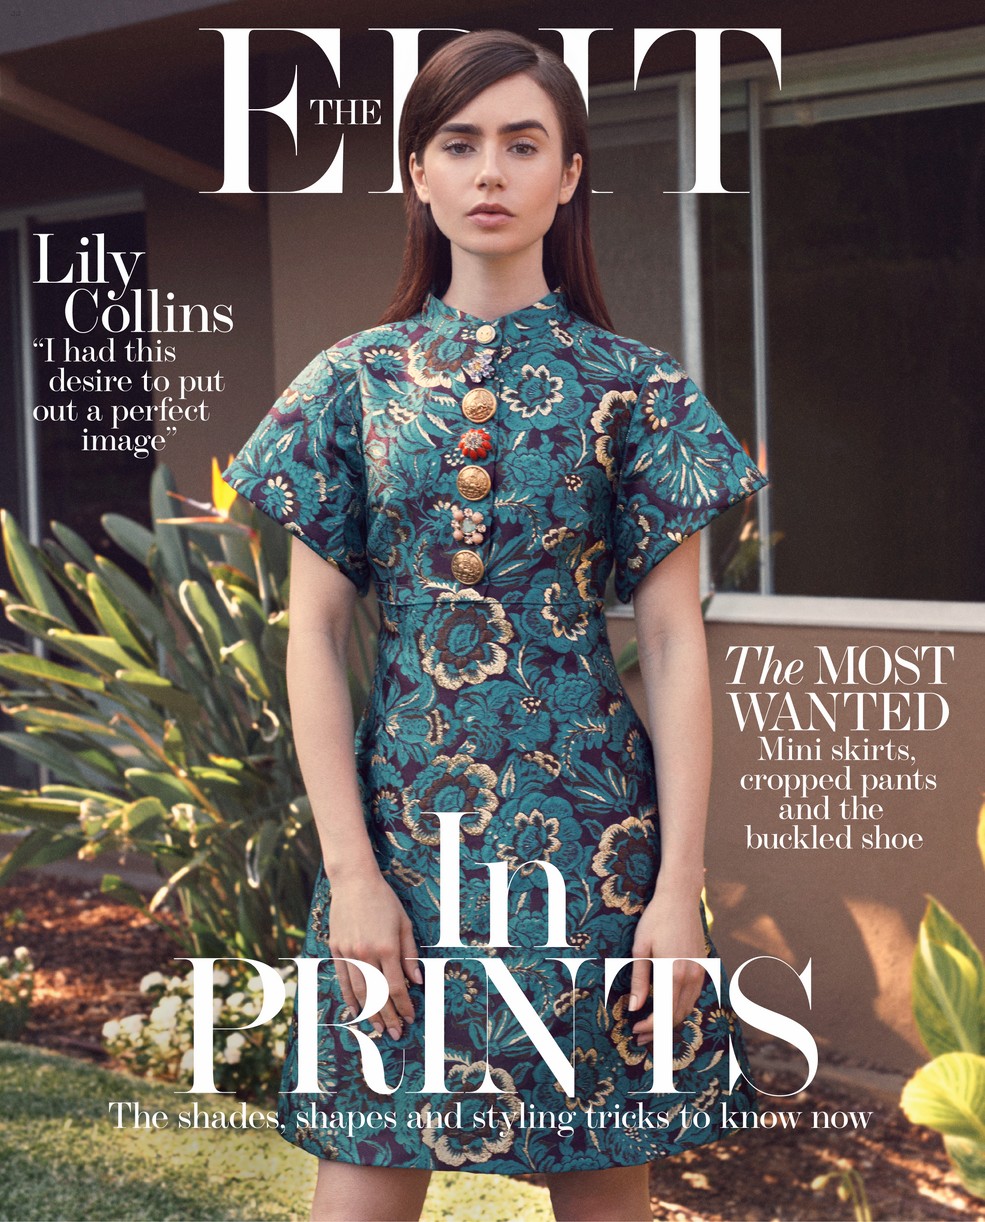 lily collins edit cover magazines quote 02